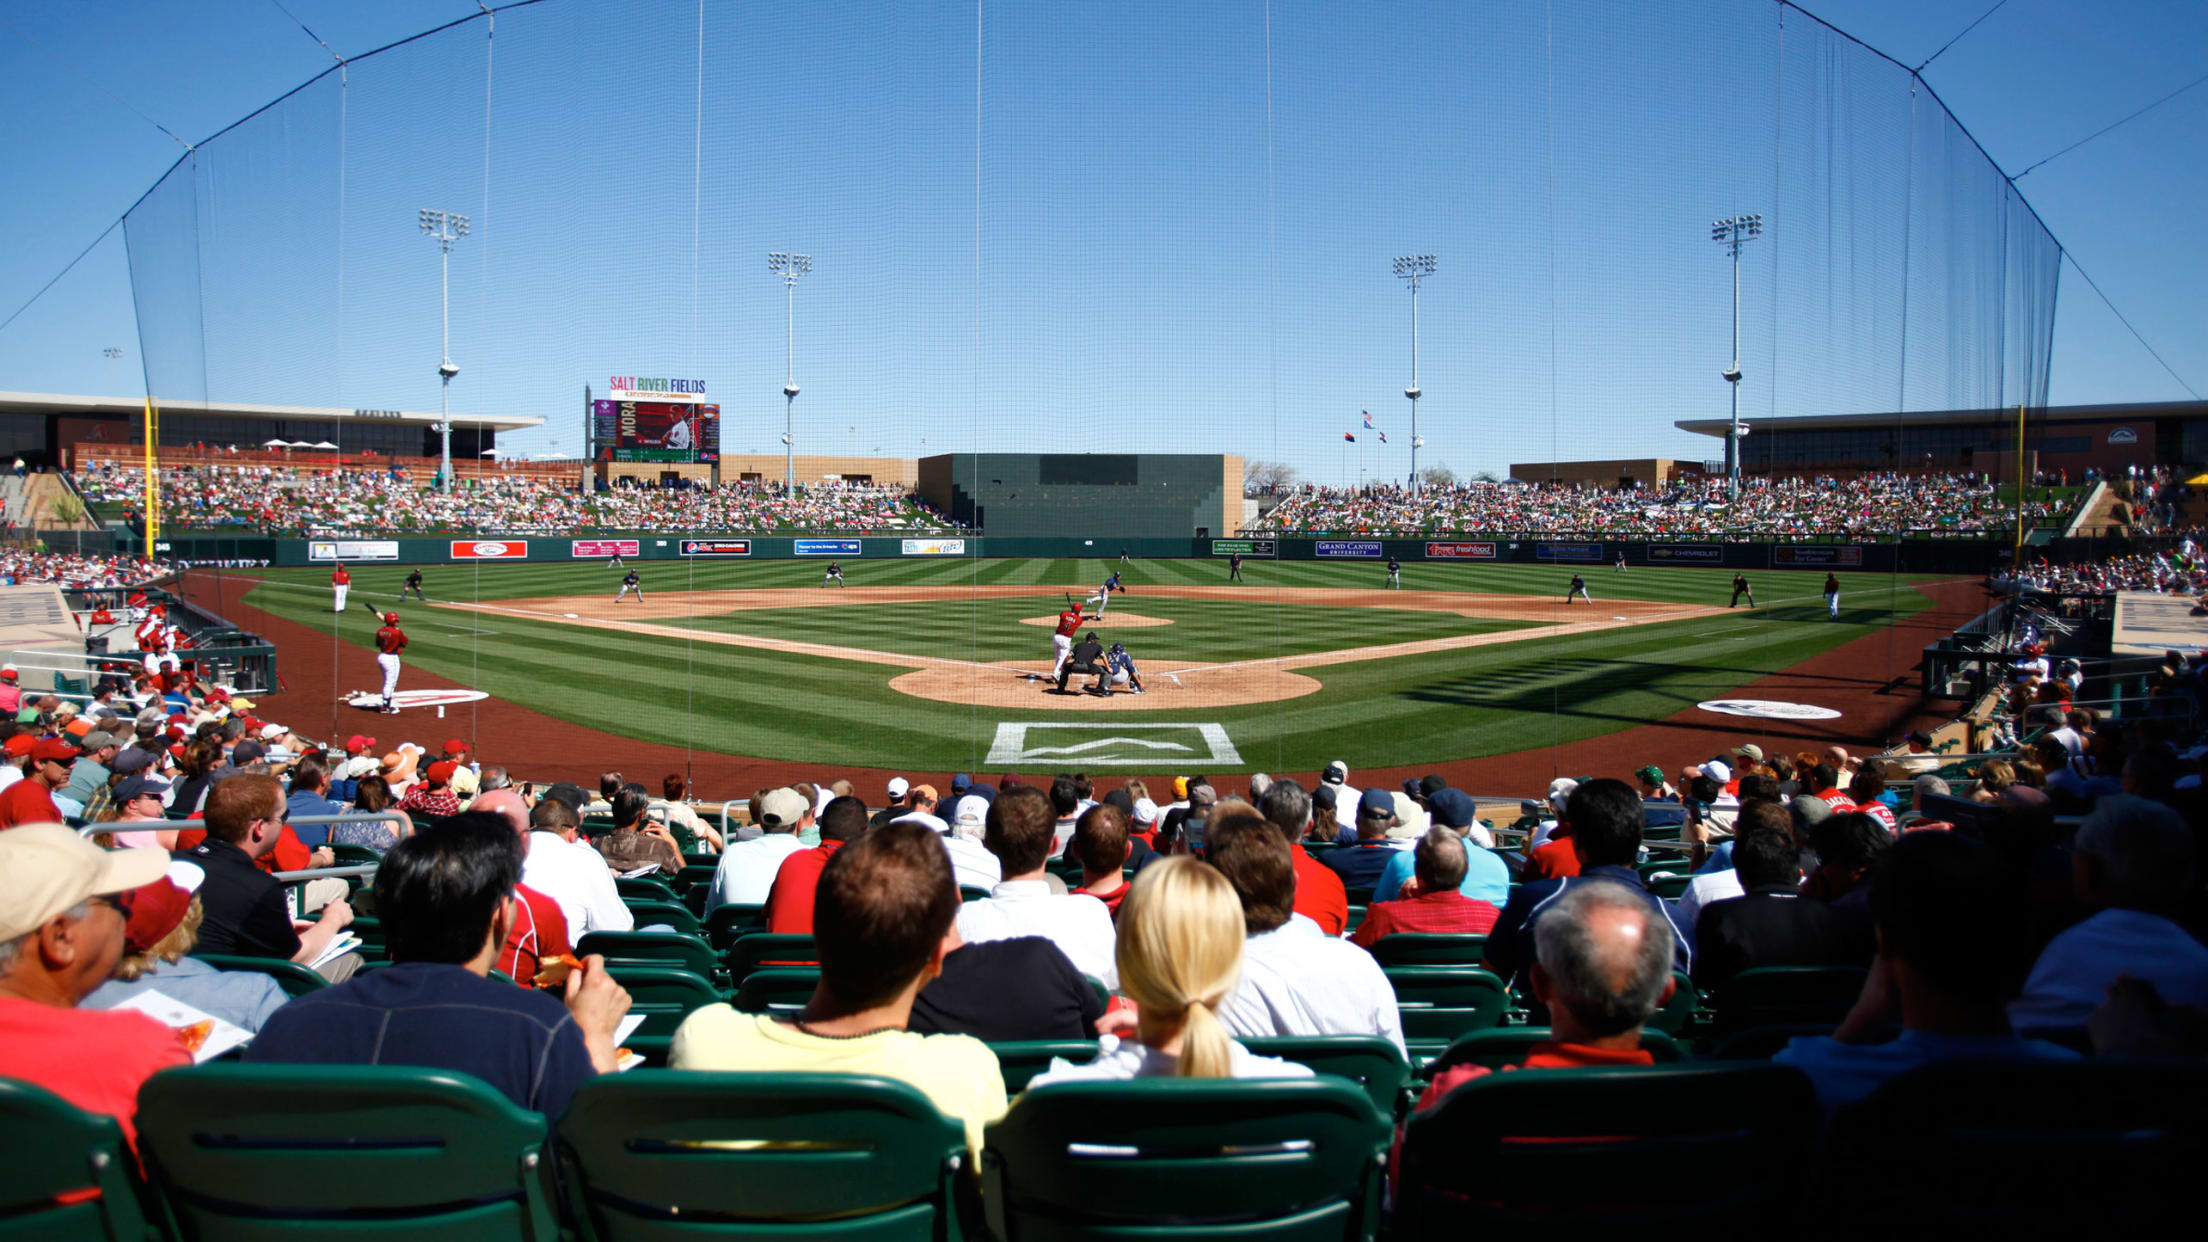 MLB spring training still a hot ticket in Arizona  The Seattle Times